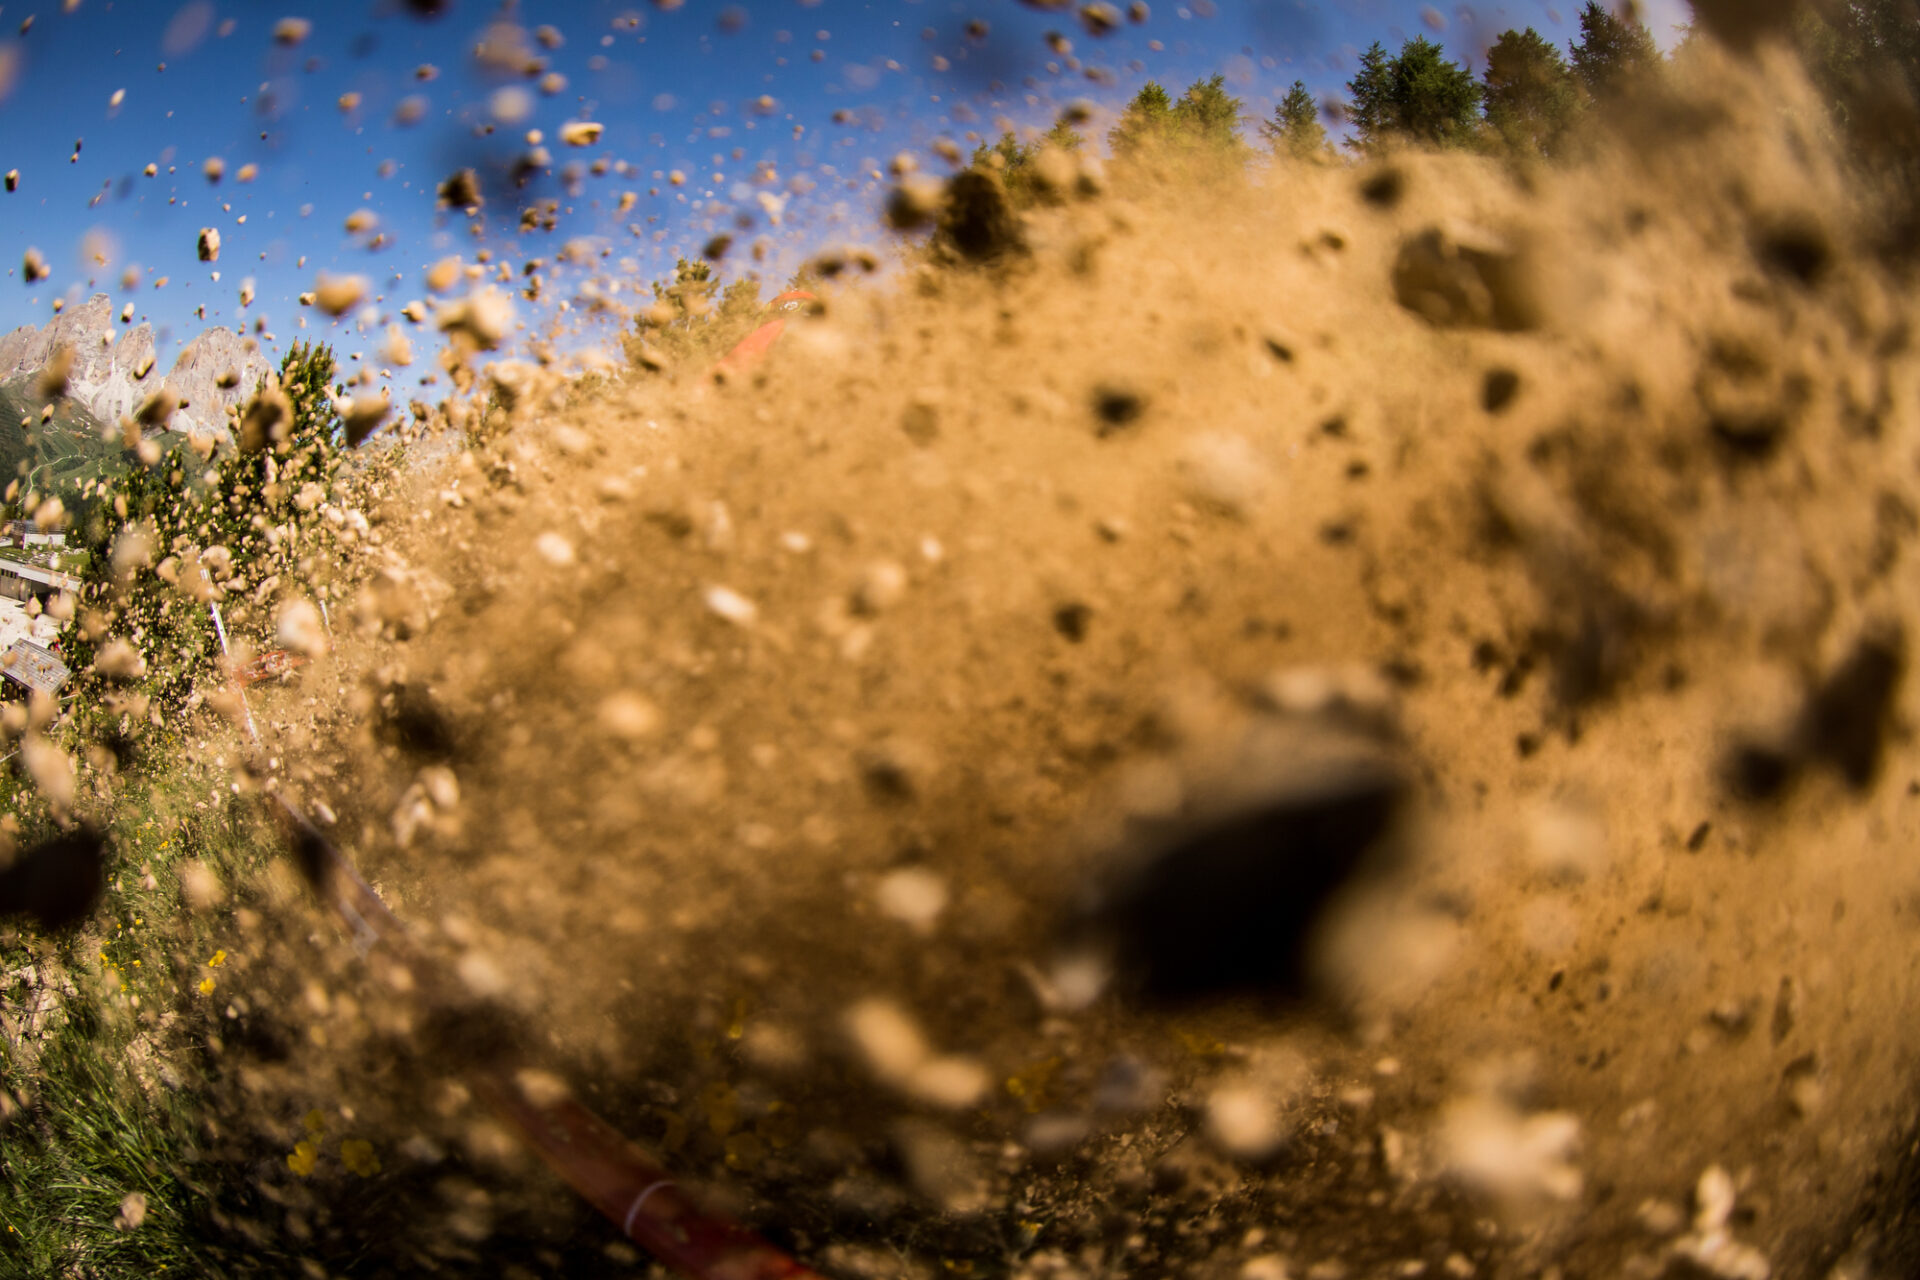 Image of dirt flung by rider